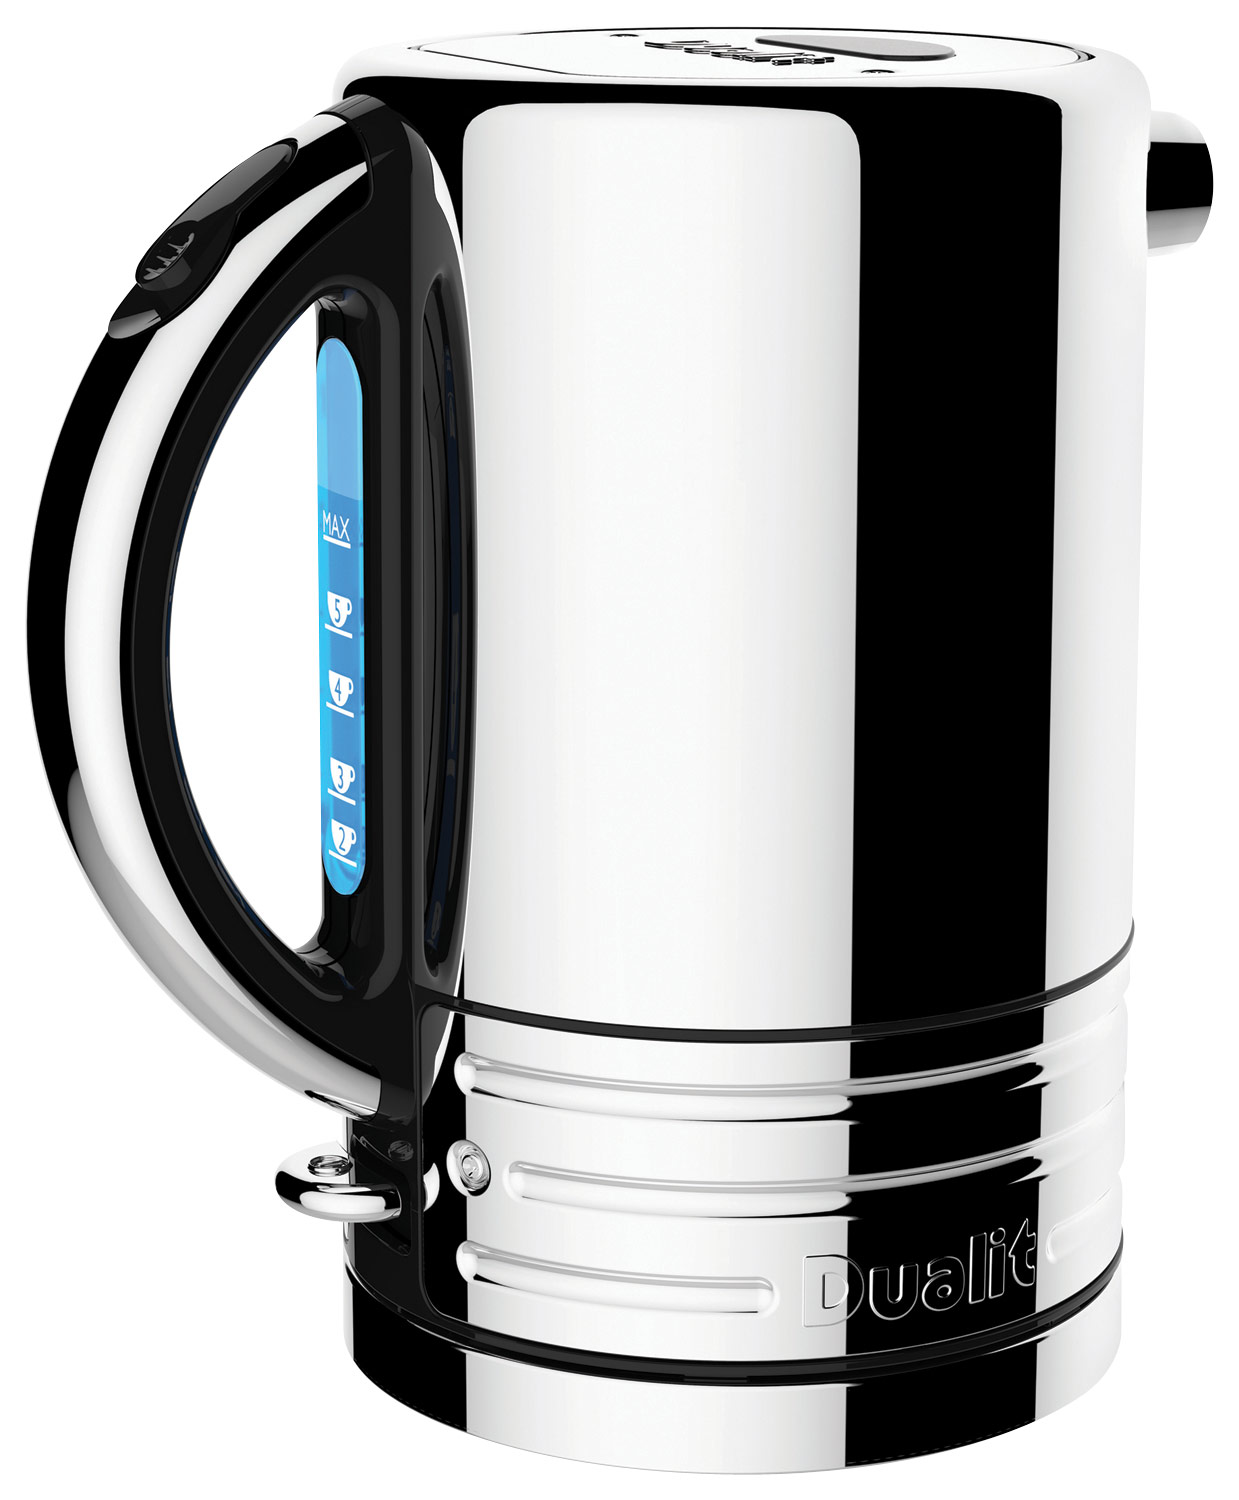 Dualit Design Series 1.5L Electric Kettle Stainless Steel 72955 - Best Buy